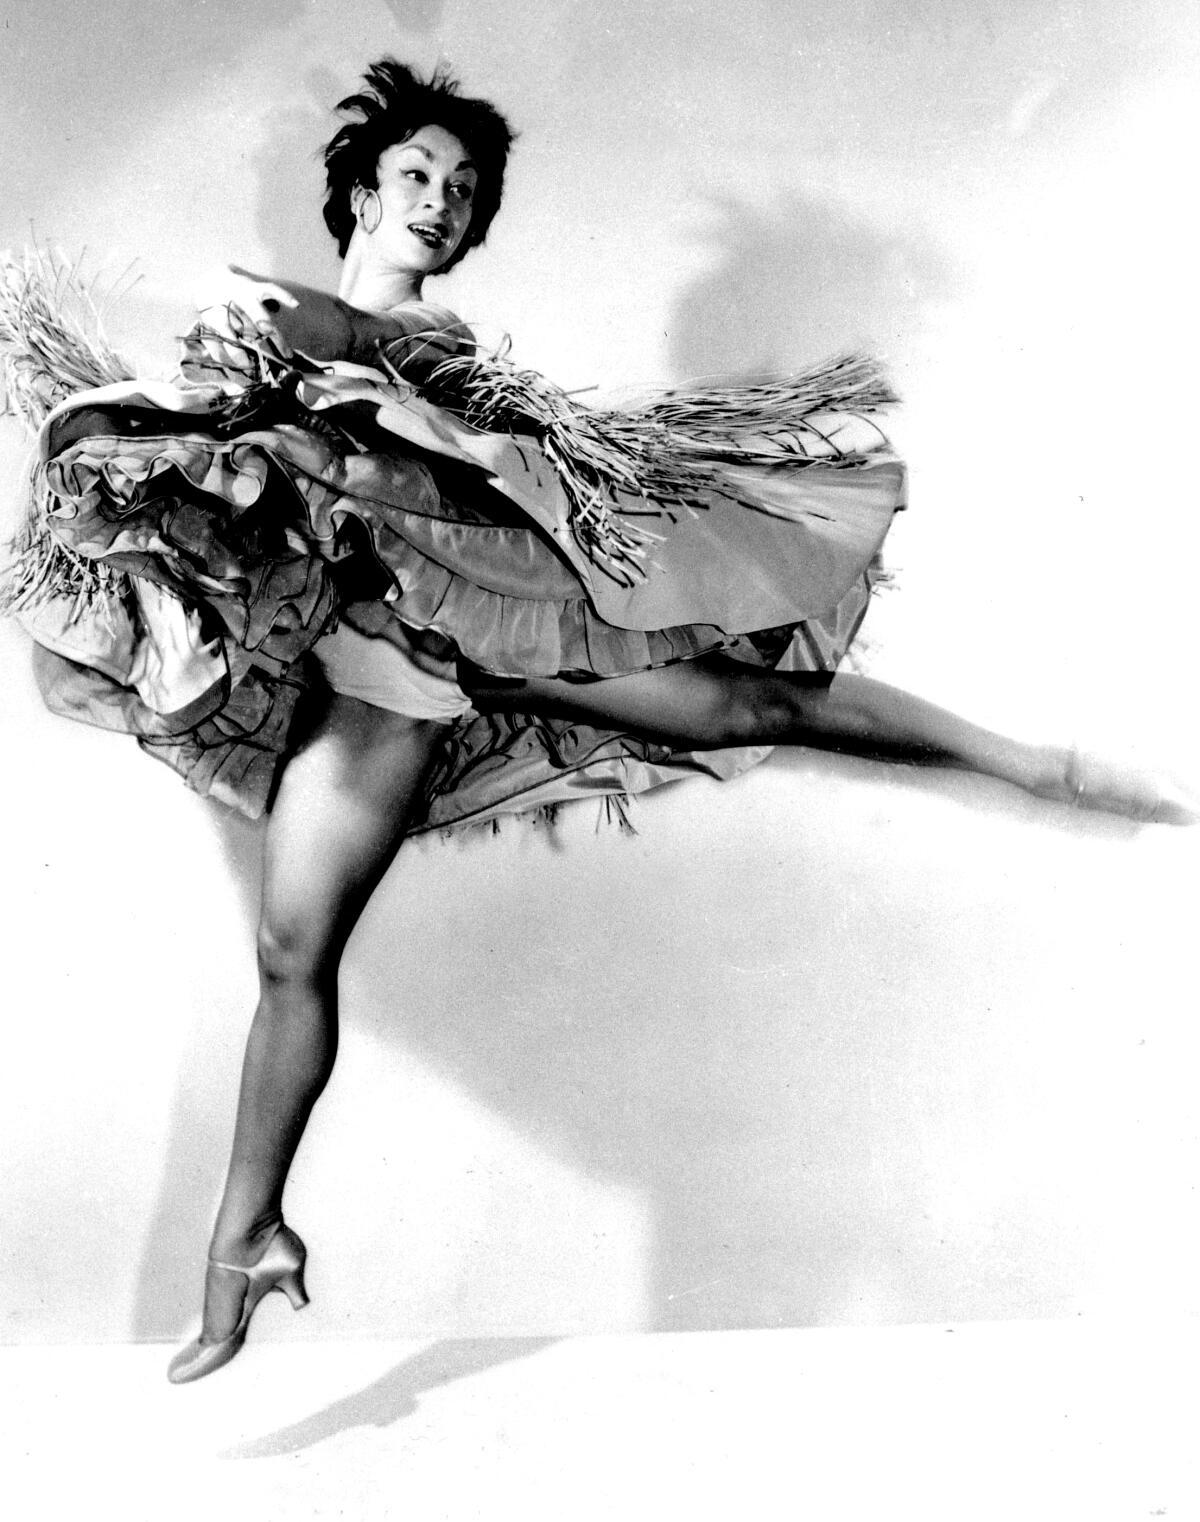 A black and white photo shows performer Chita Rivera, mid leap, her skirts fluttering all around her.